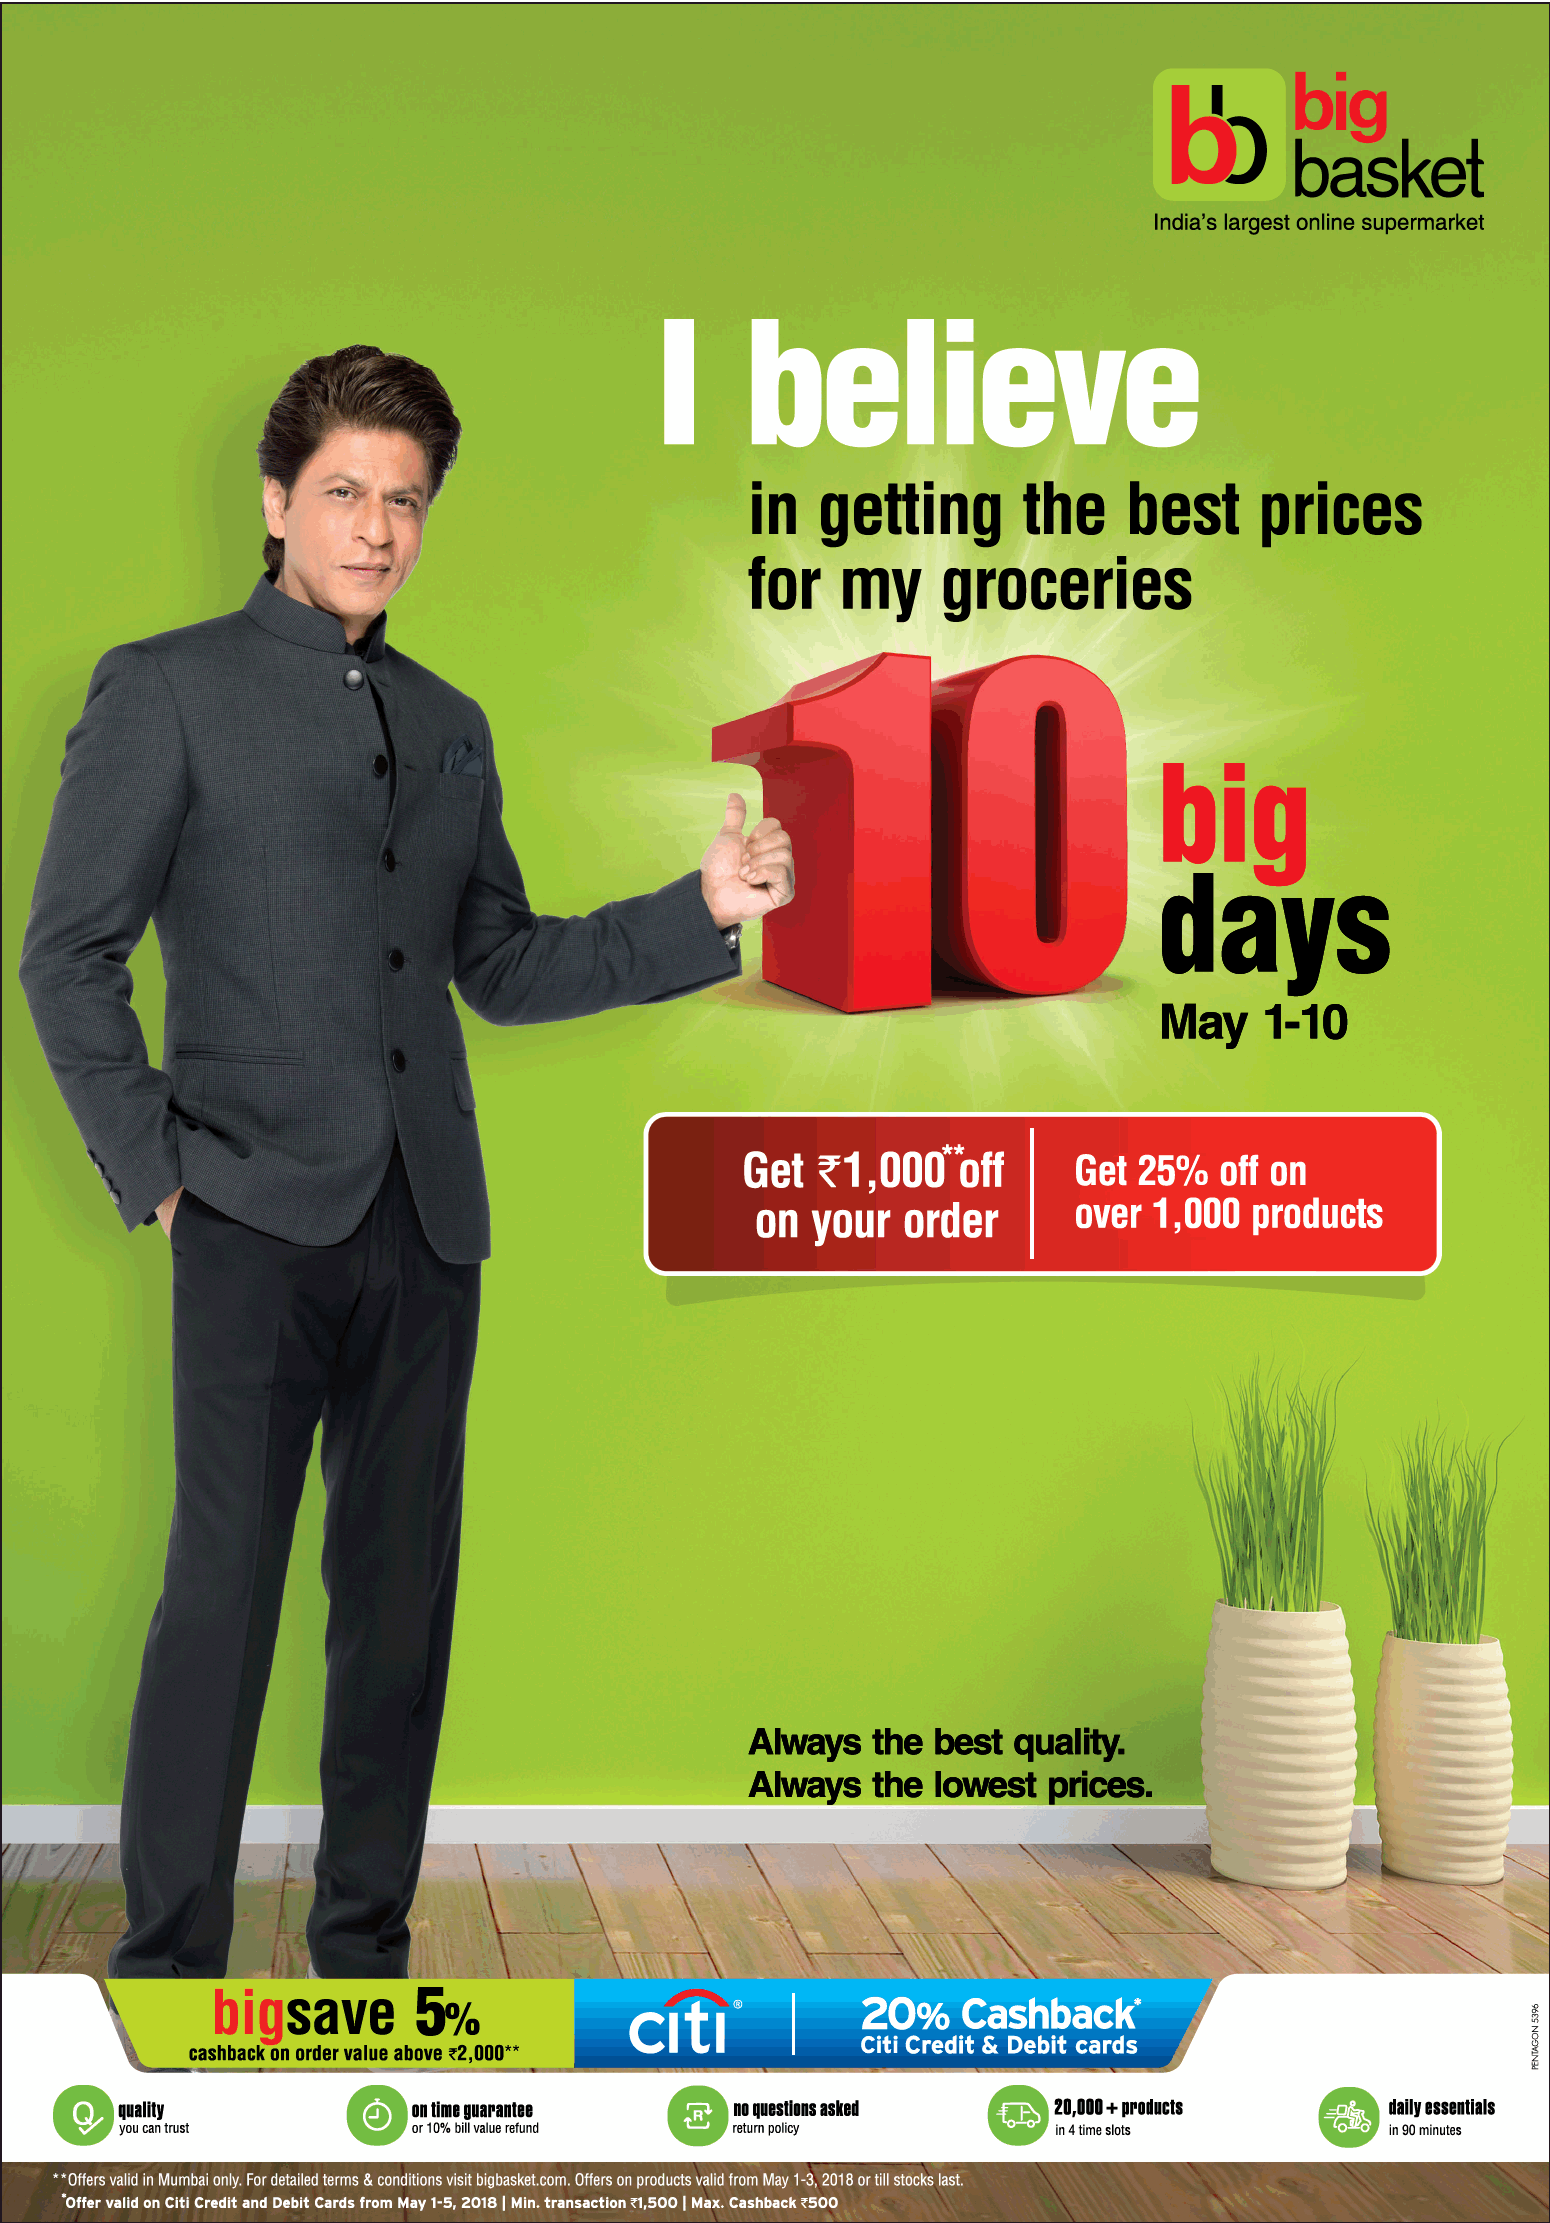 https://newspaperads.ads2publish.com/wp-content/uploads/2018/05/big-basket-i-believe-in-getting-the-best-proces-for-my-groceries-ad-bombay-times-01-05-2018.png